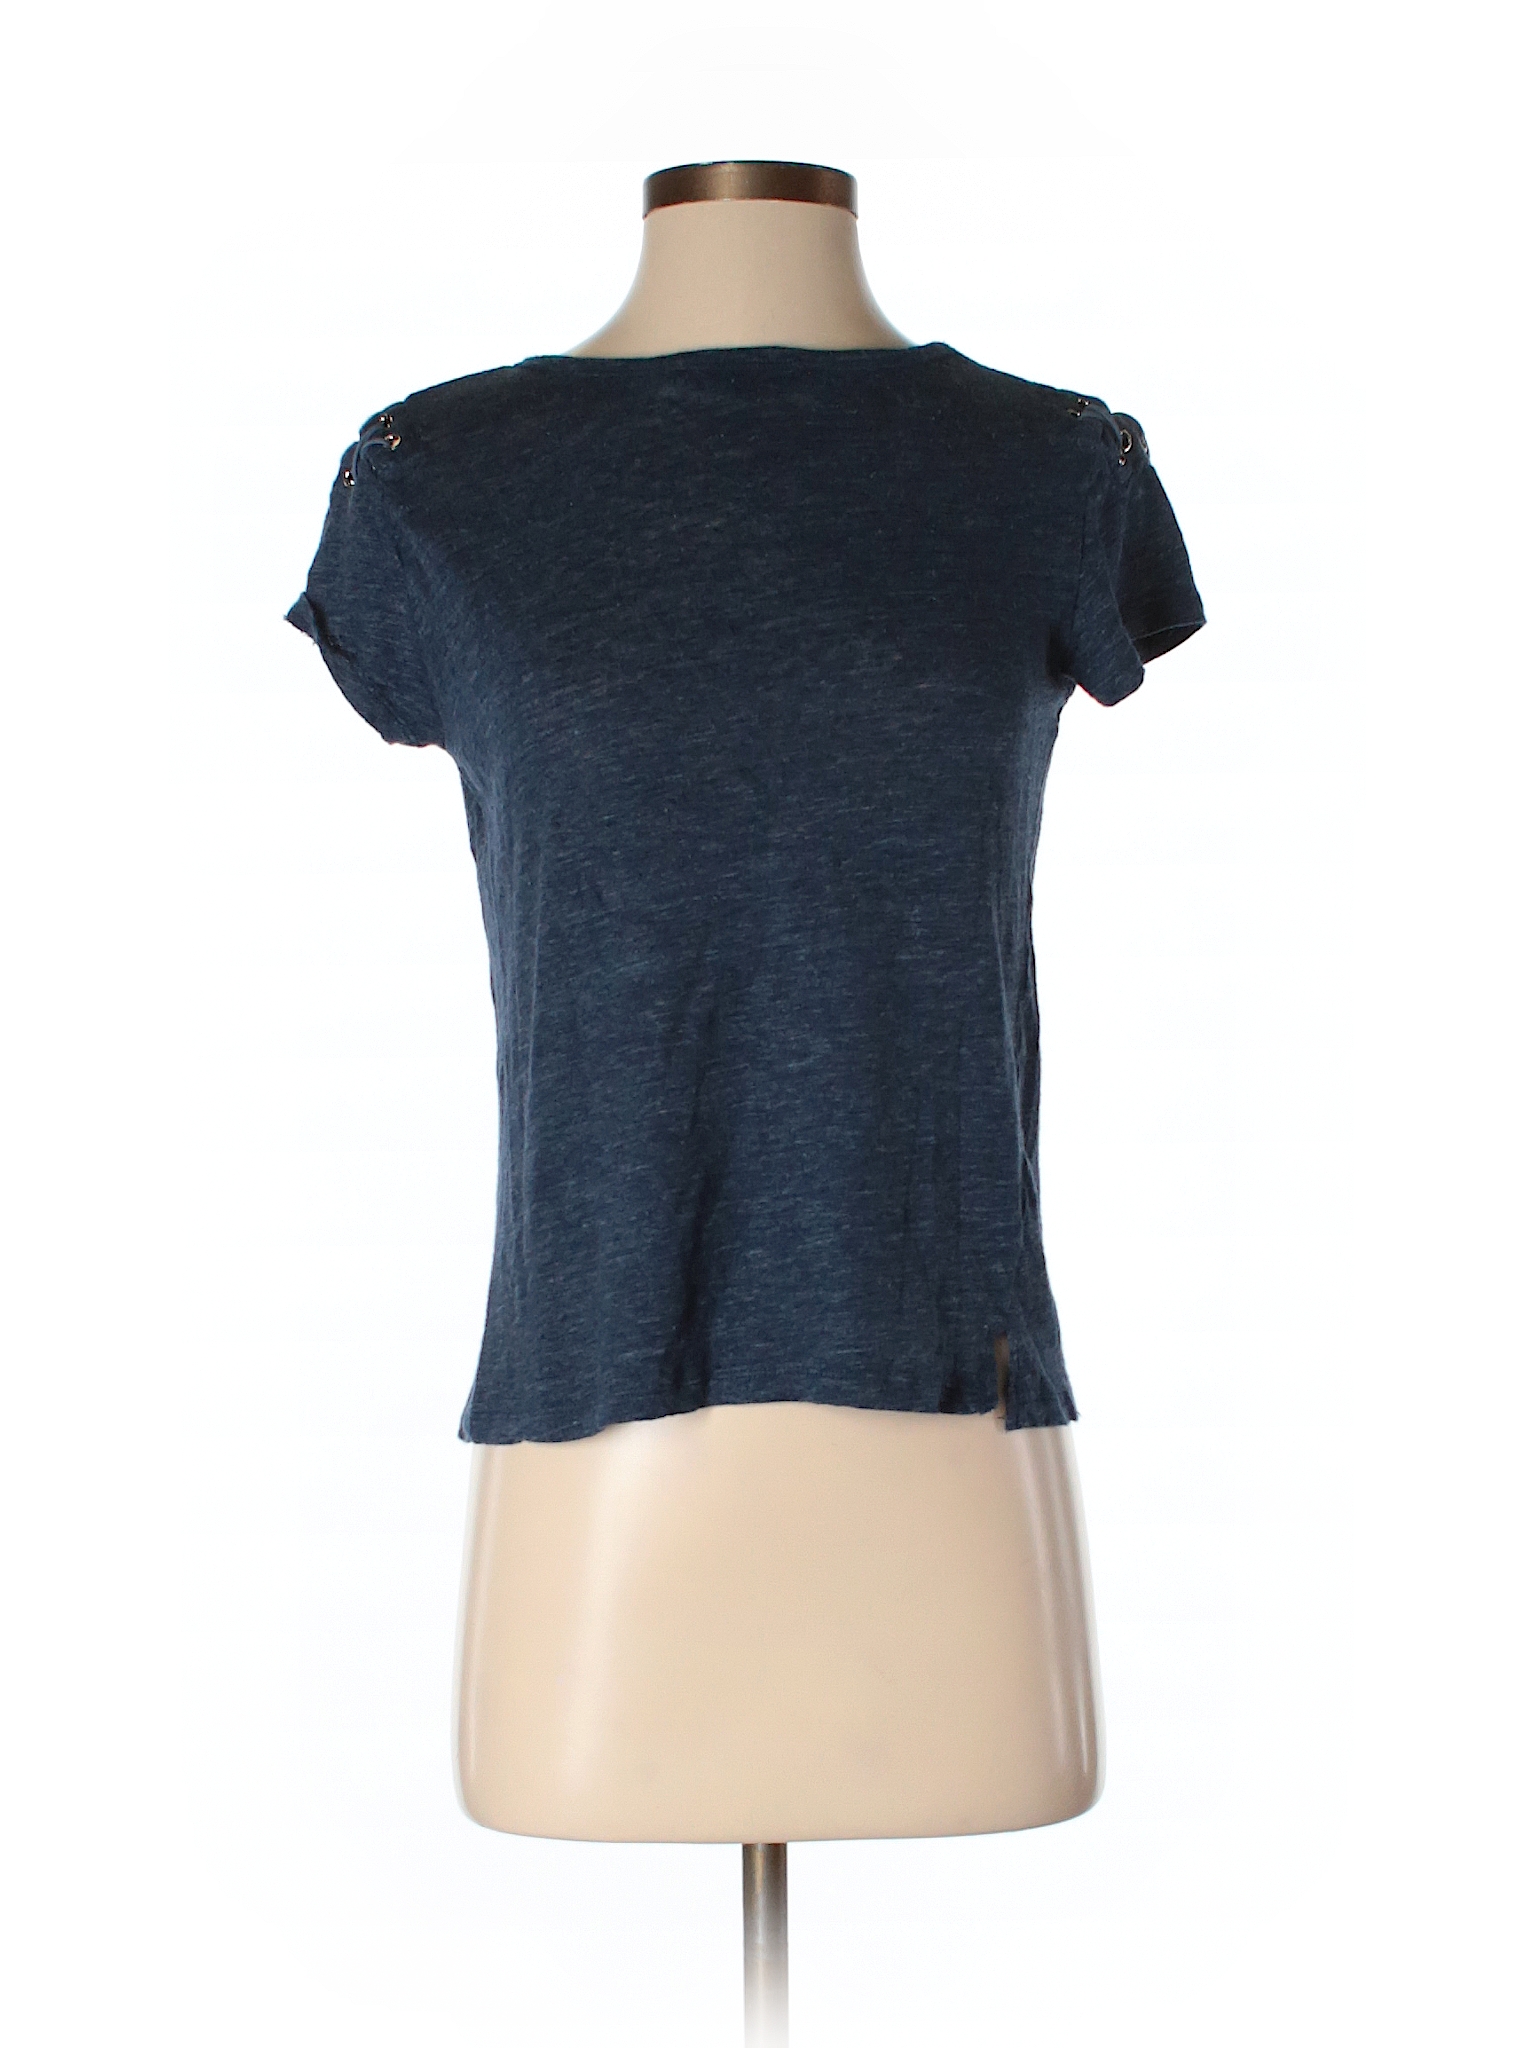 Generation Love 100% Linen Solid Navy Blue Short Sleeve Top Size S - 81 ...